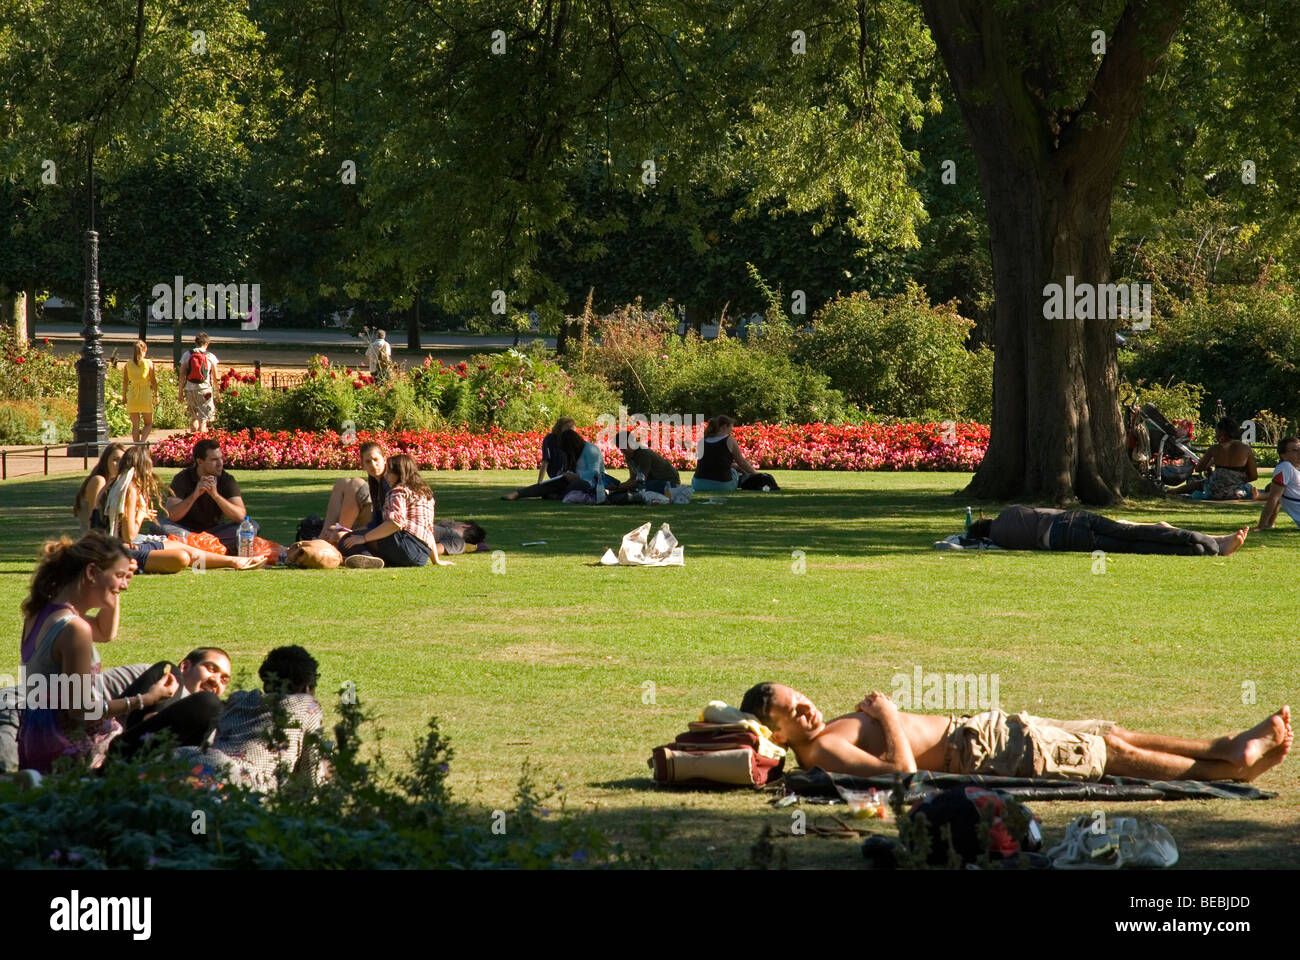 People relaxing on the grass on a sunny day in summer, Hyde Park London England UK Stock Photo